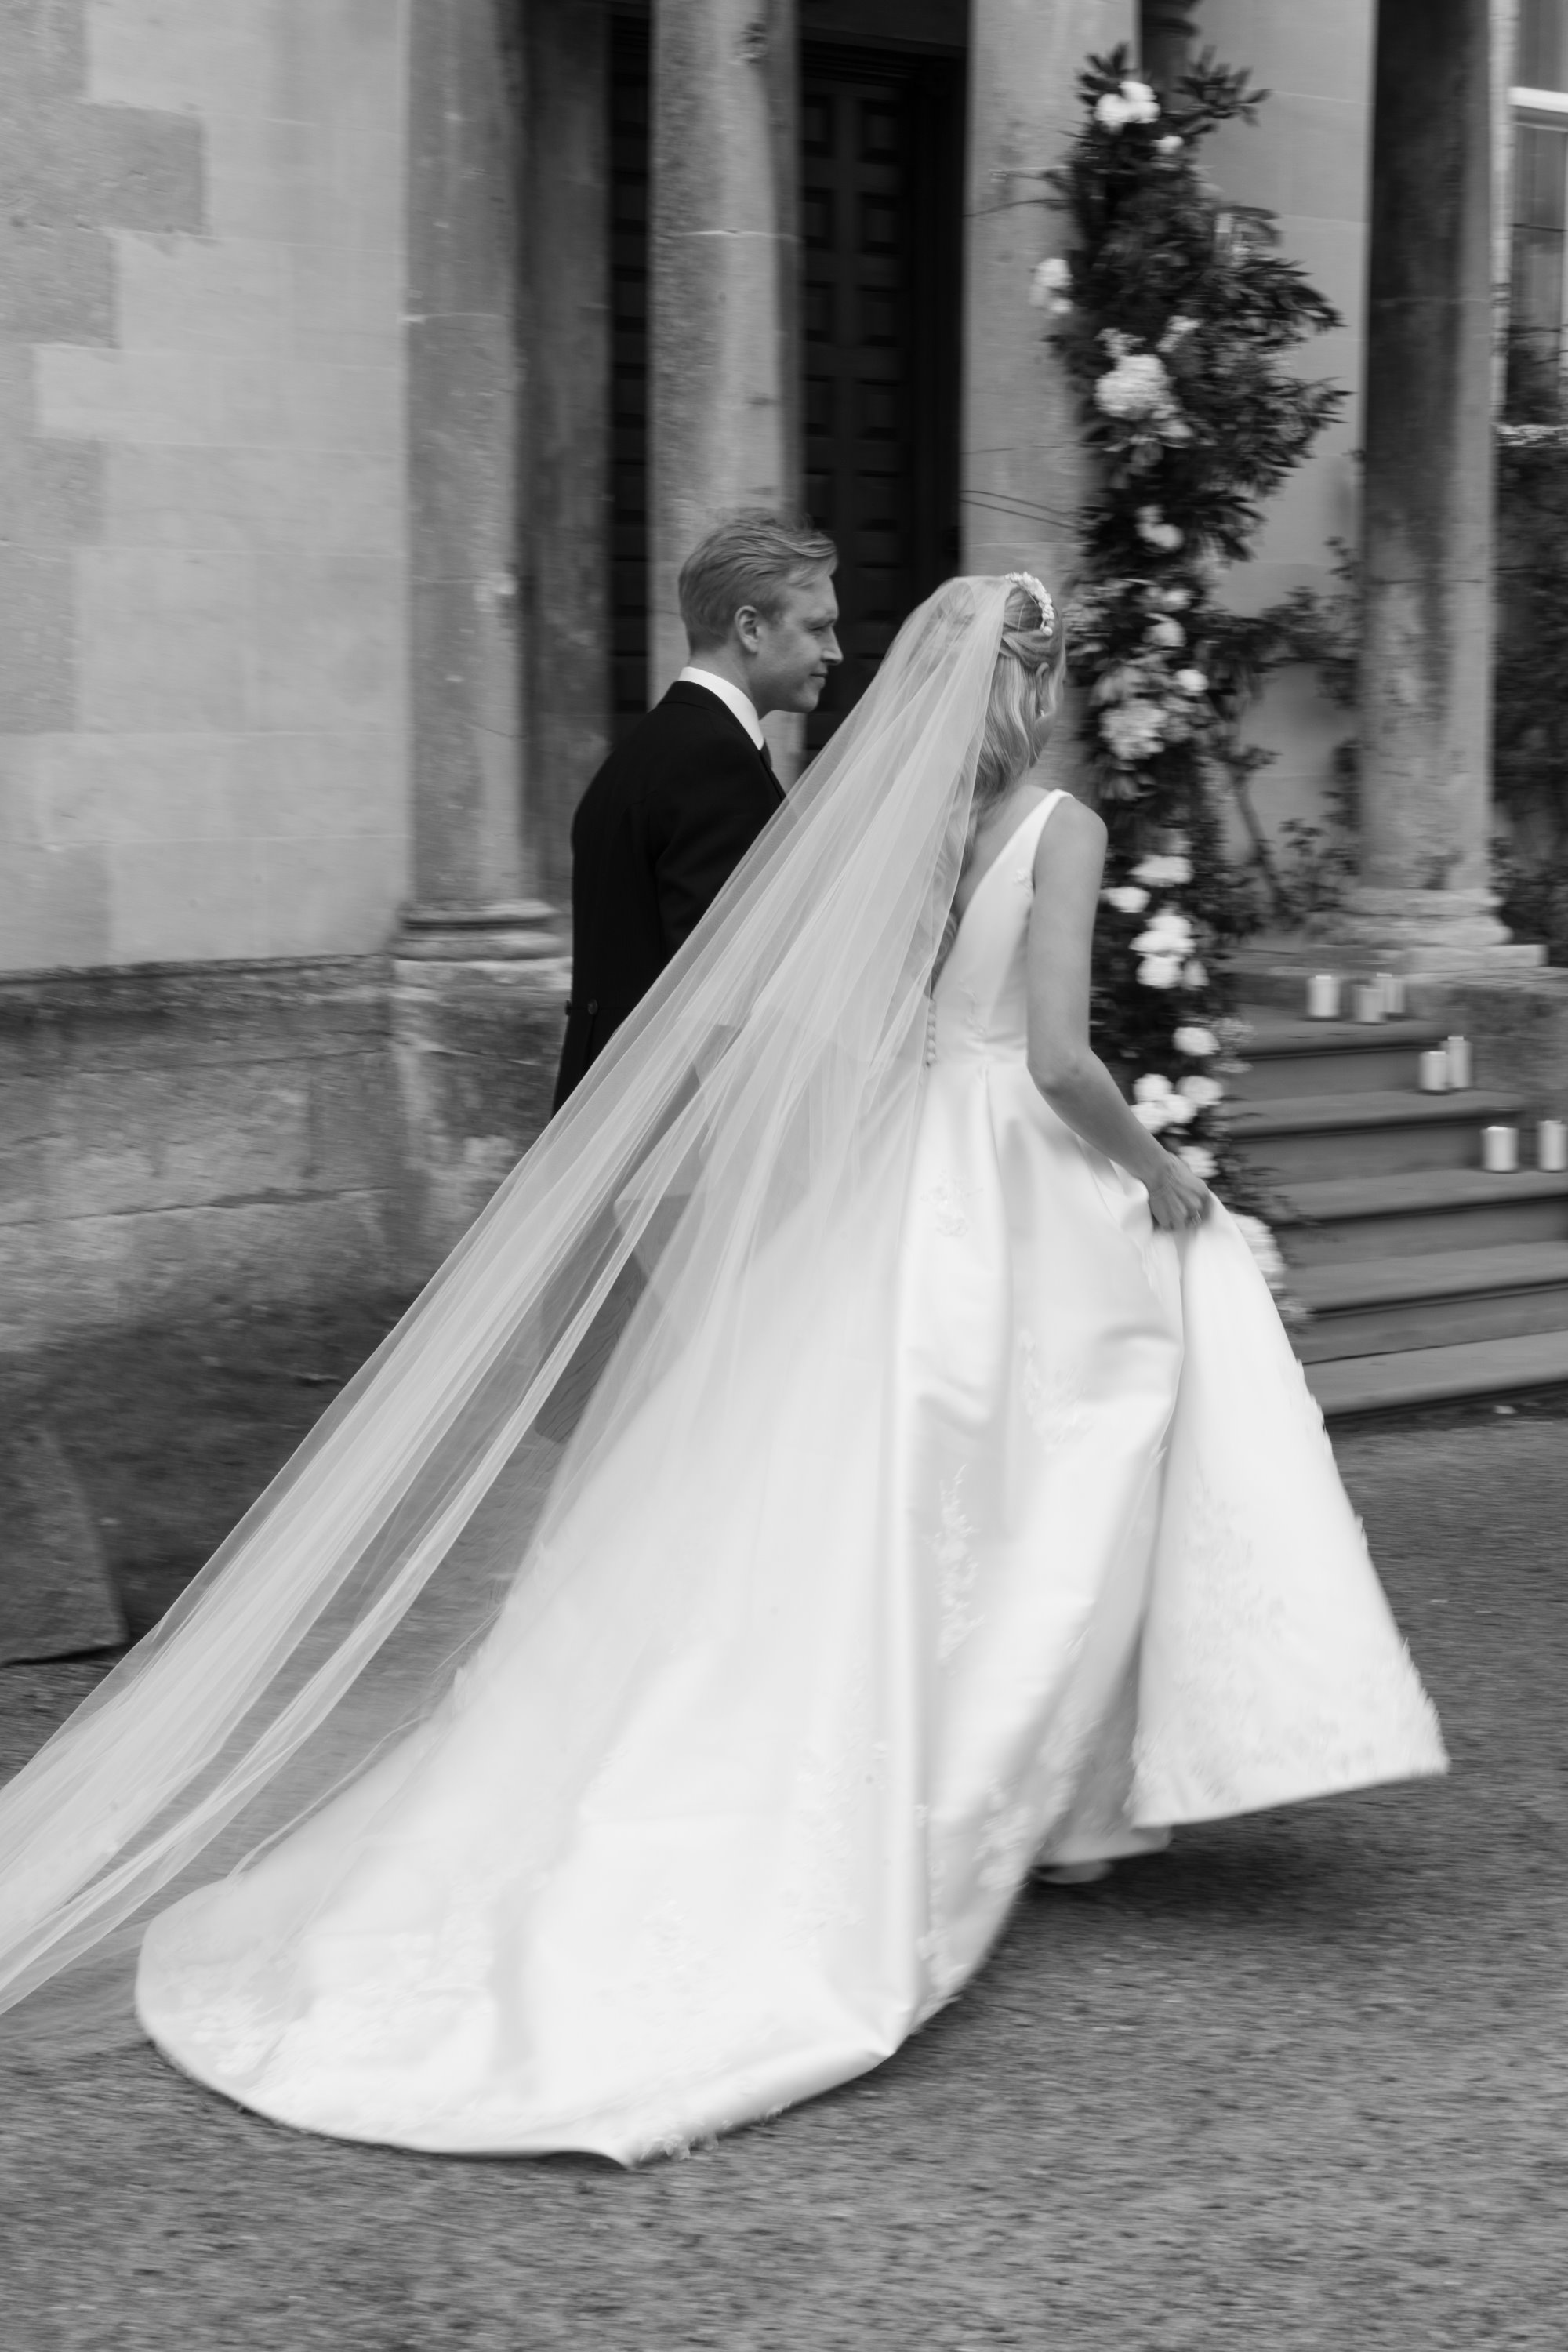 bride with long white veil walking with her new husband